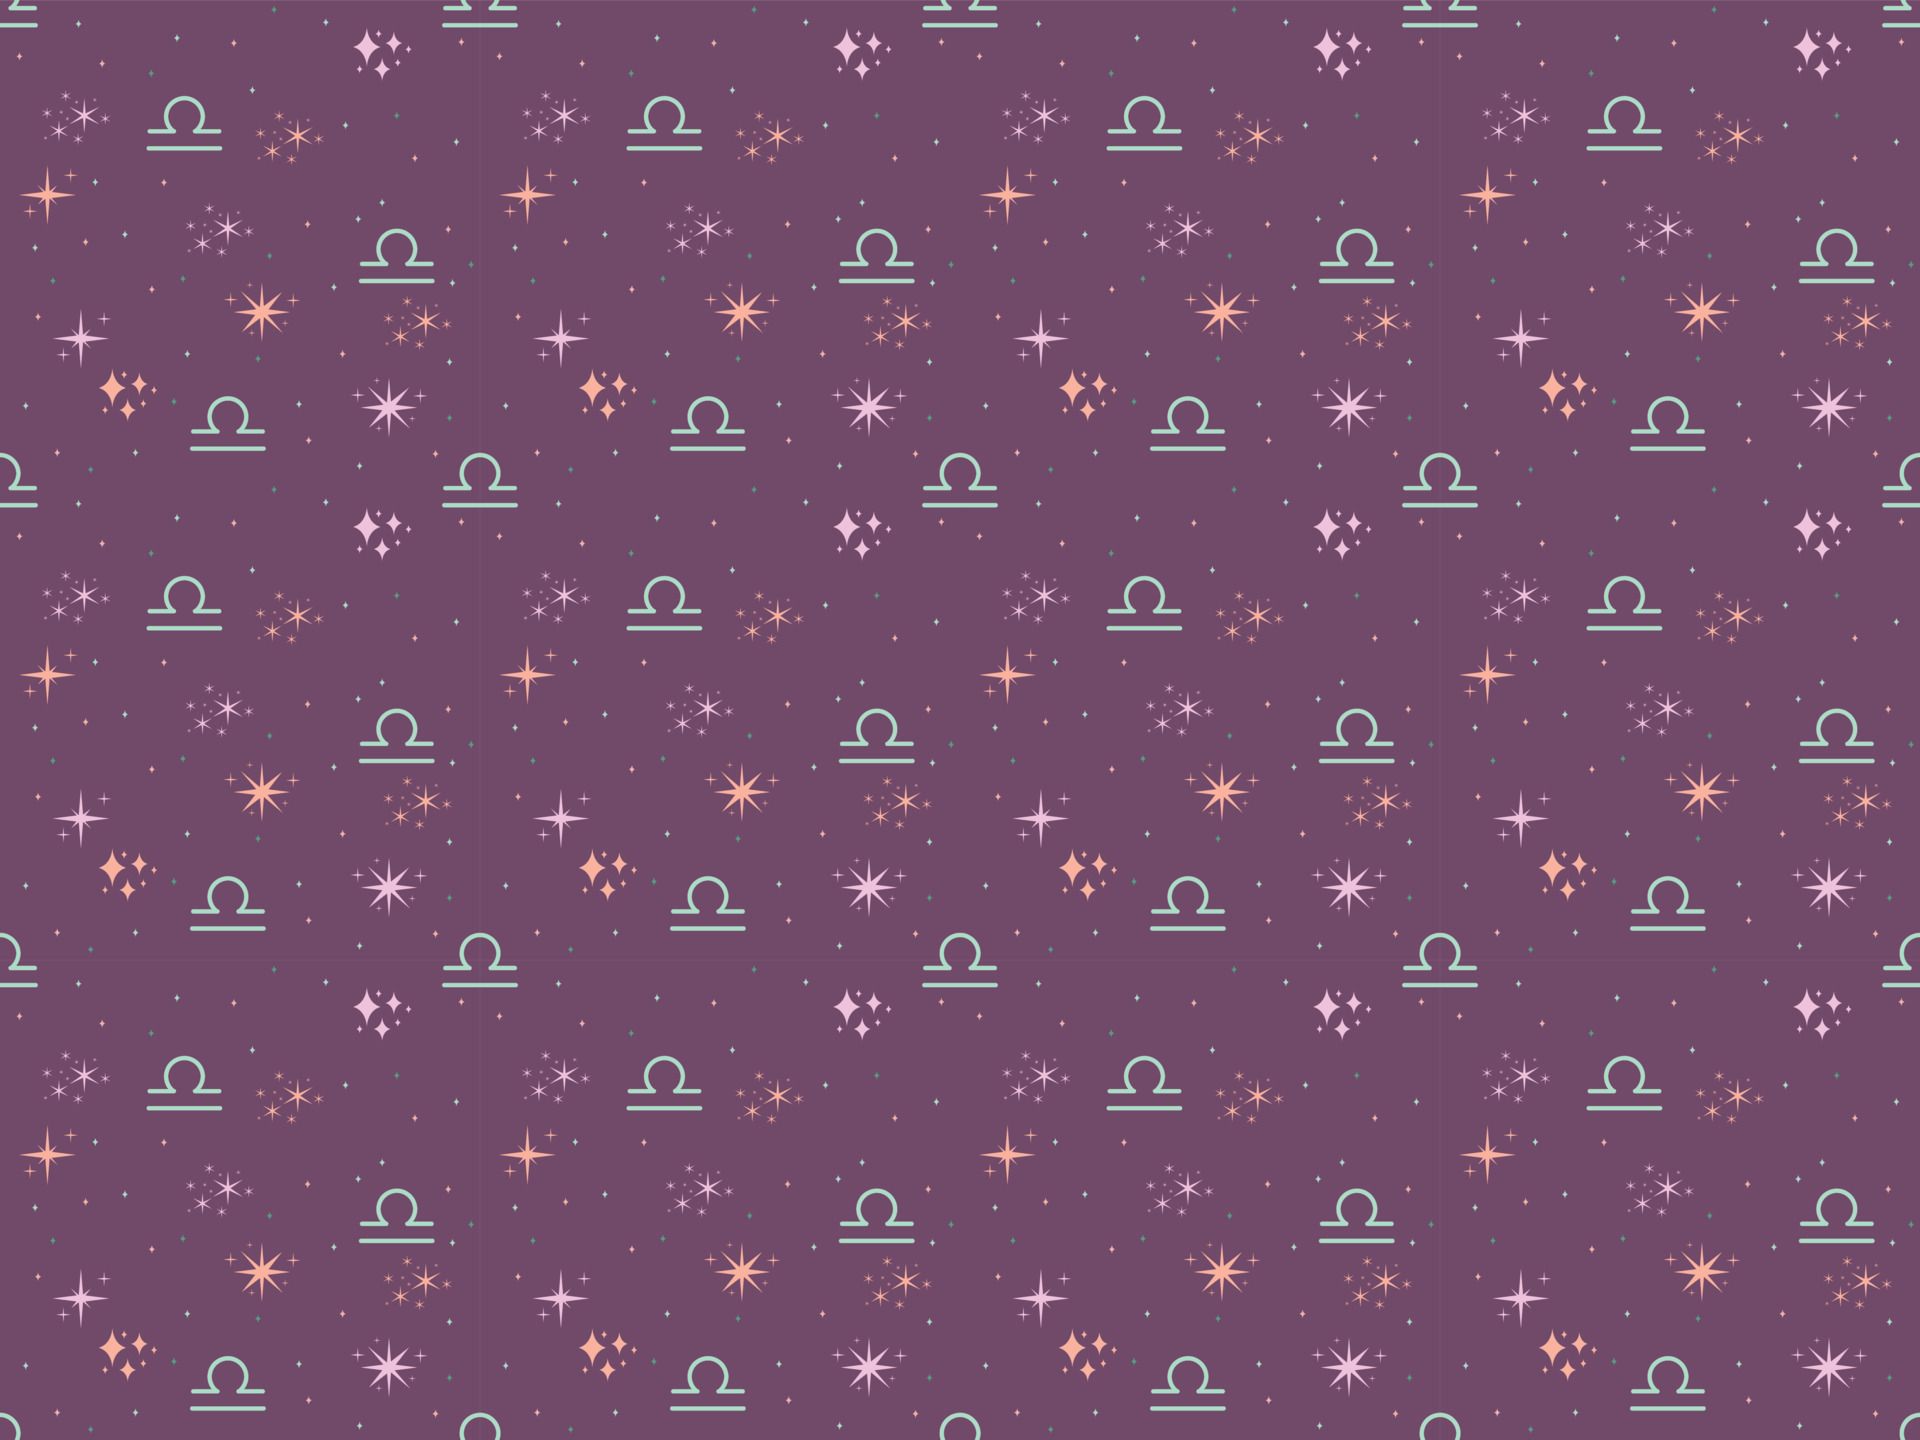 A pattern of the Libra sign and stars on a purple background - Libra